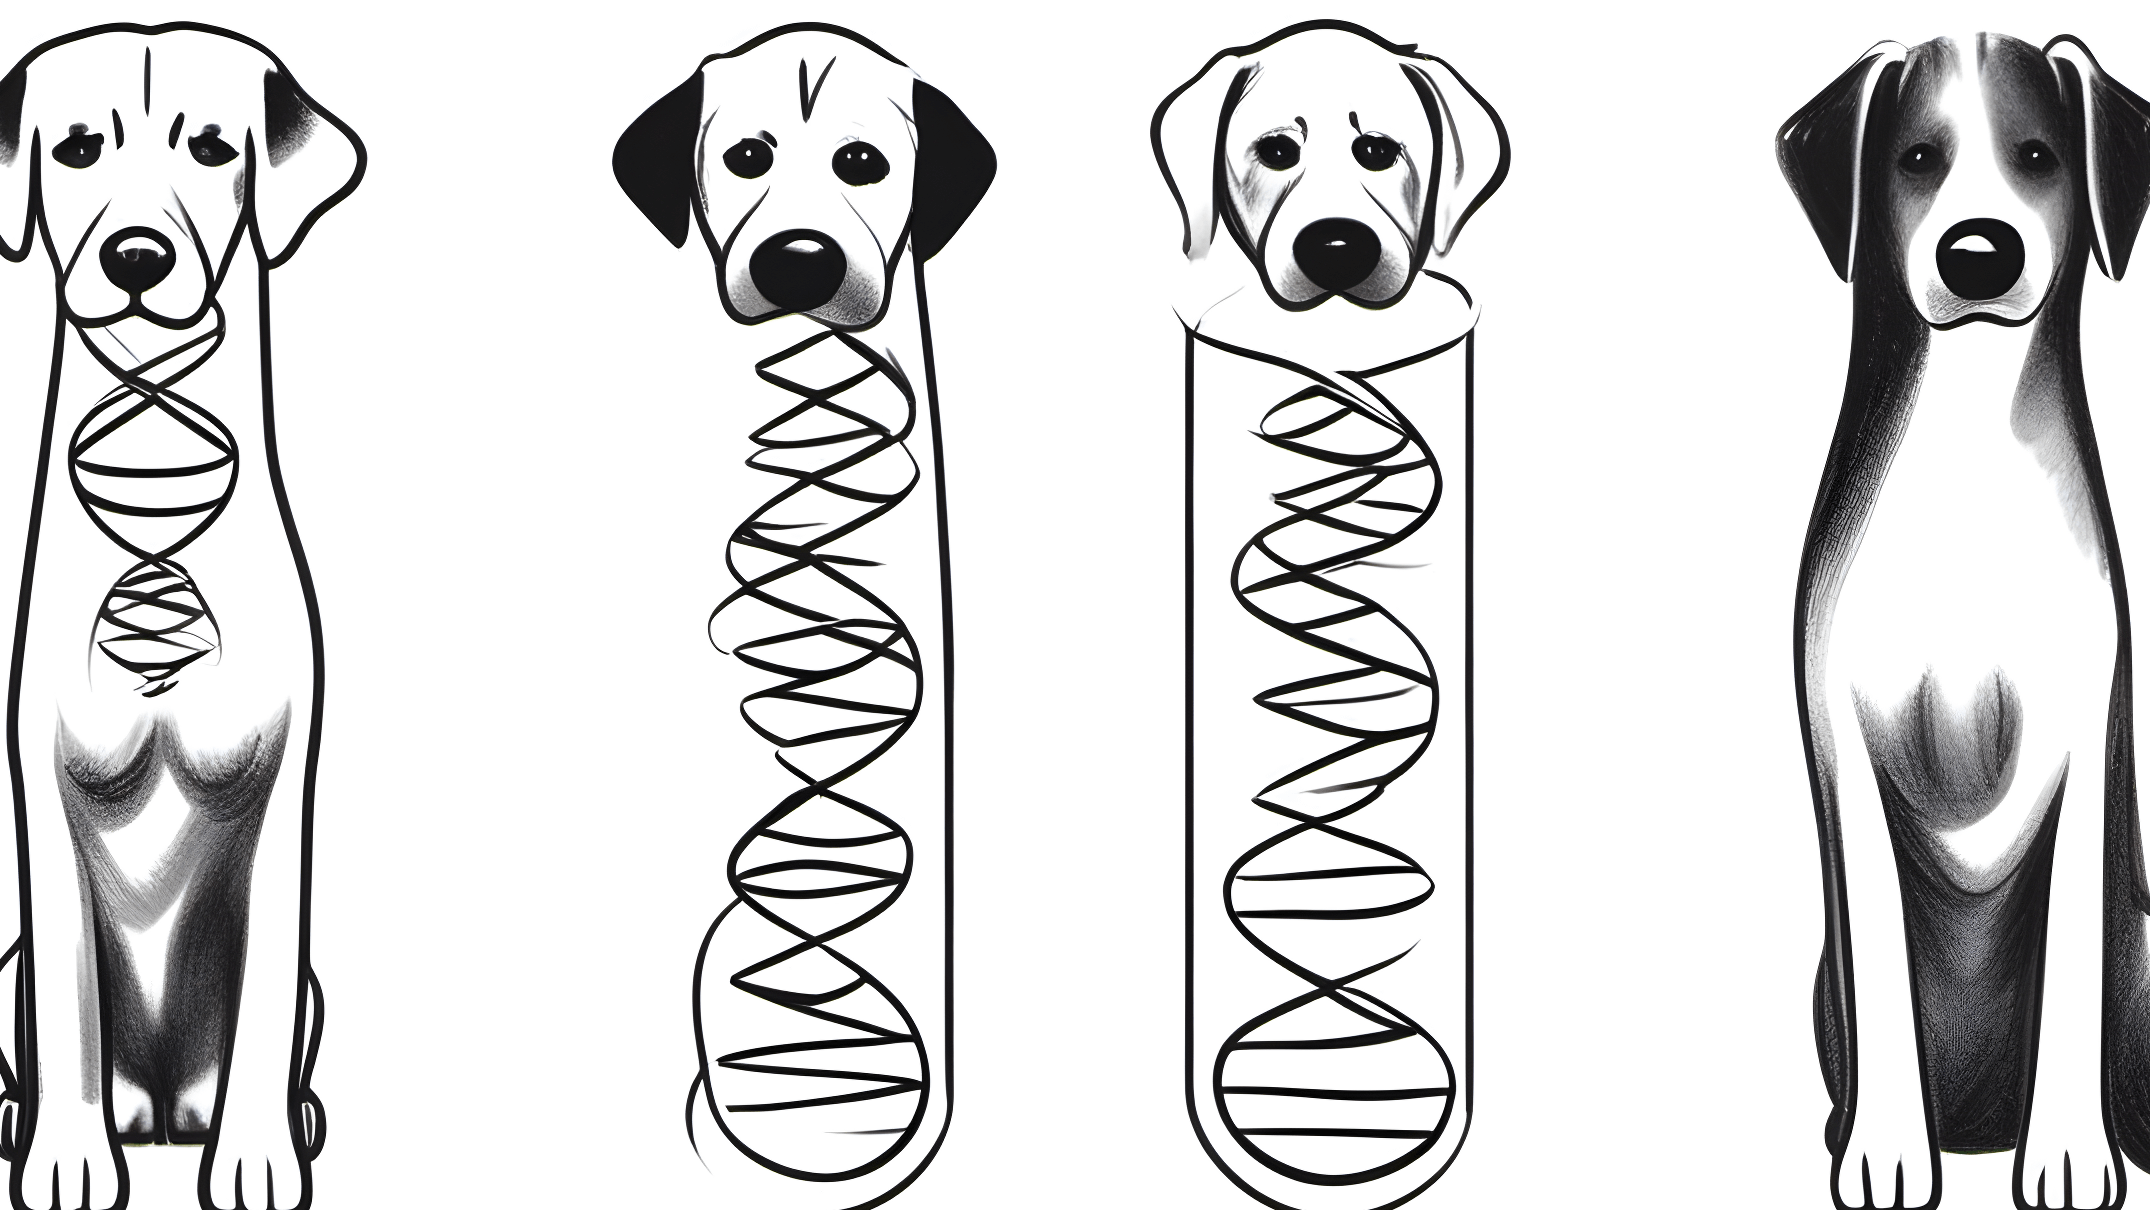 A DNA double helix alongside images of short-haired and long-haired Labradors, symbolizing the genetic factors that determine their coat types